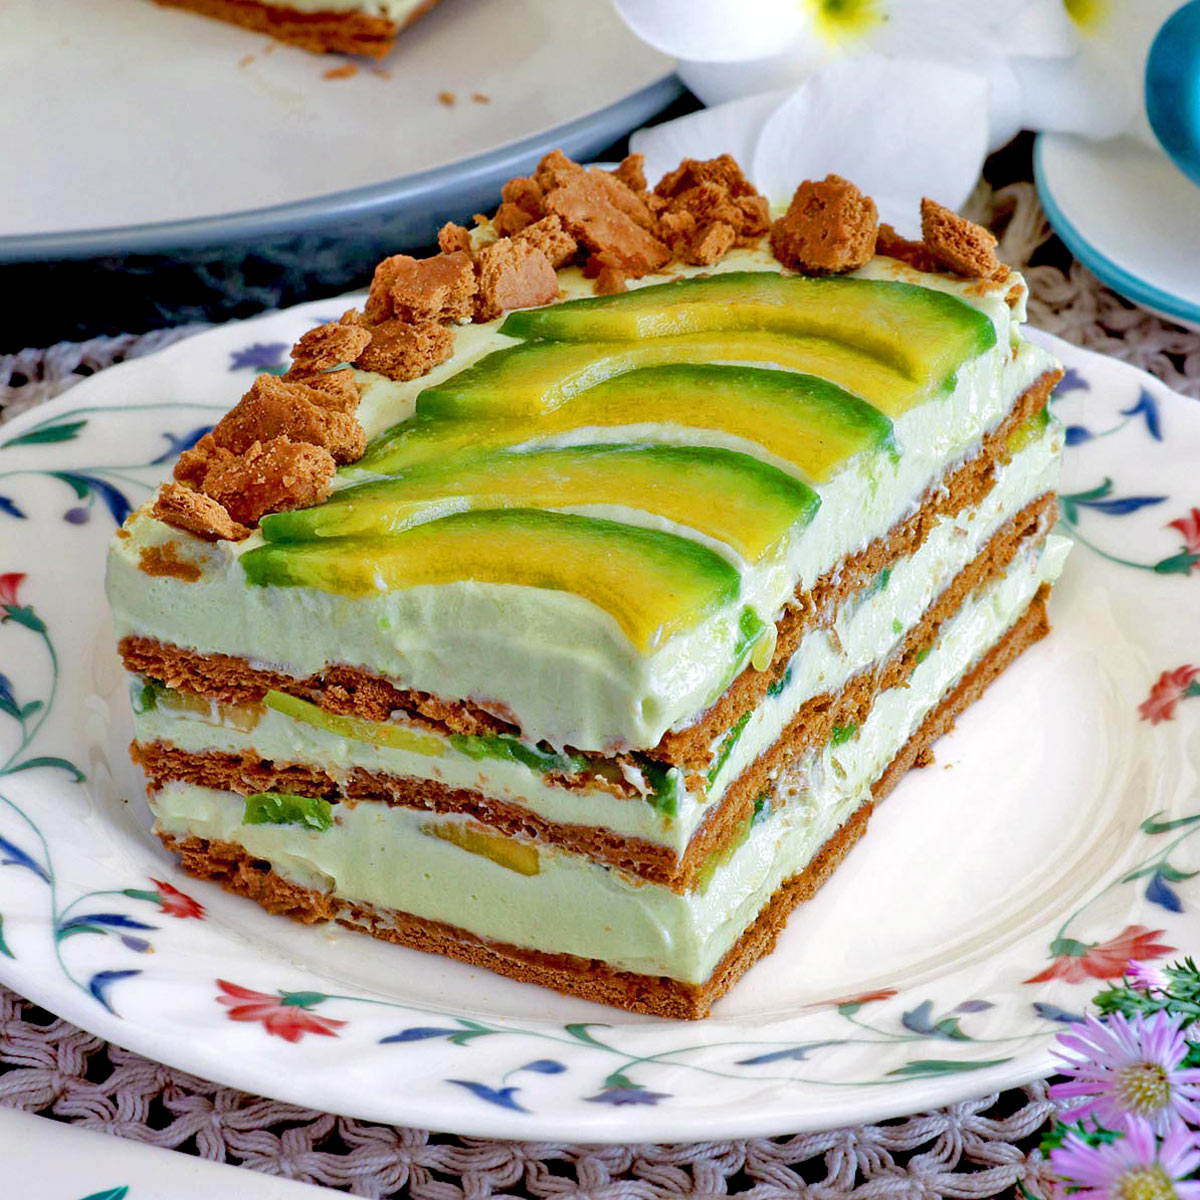 A slice of avocado float topped with slices of avocado and crushed graham crackers.